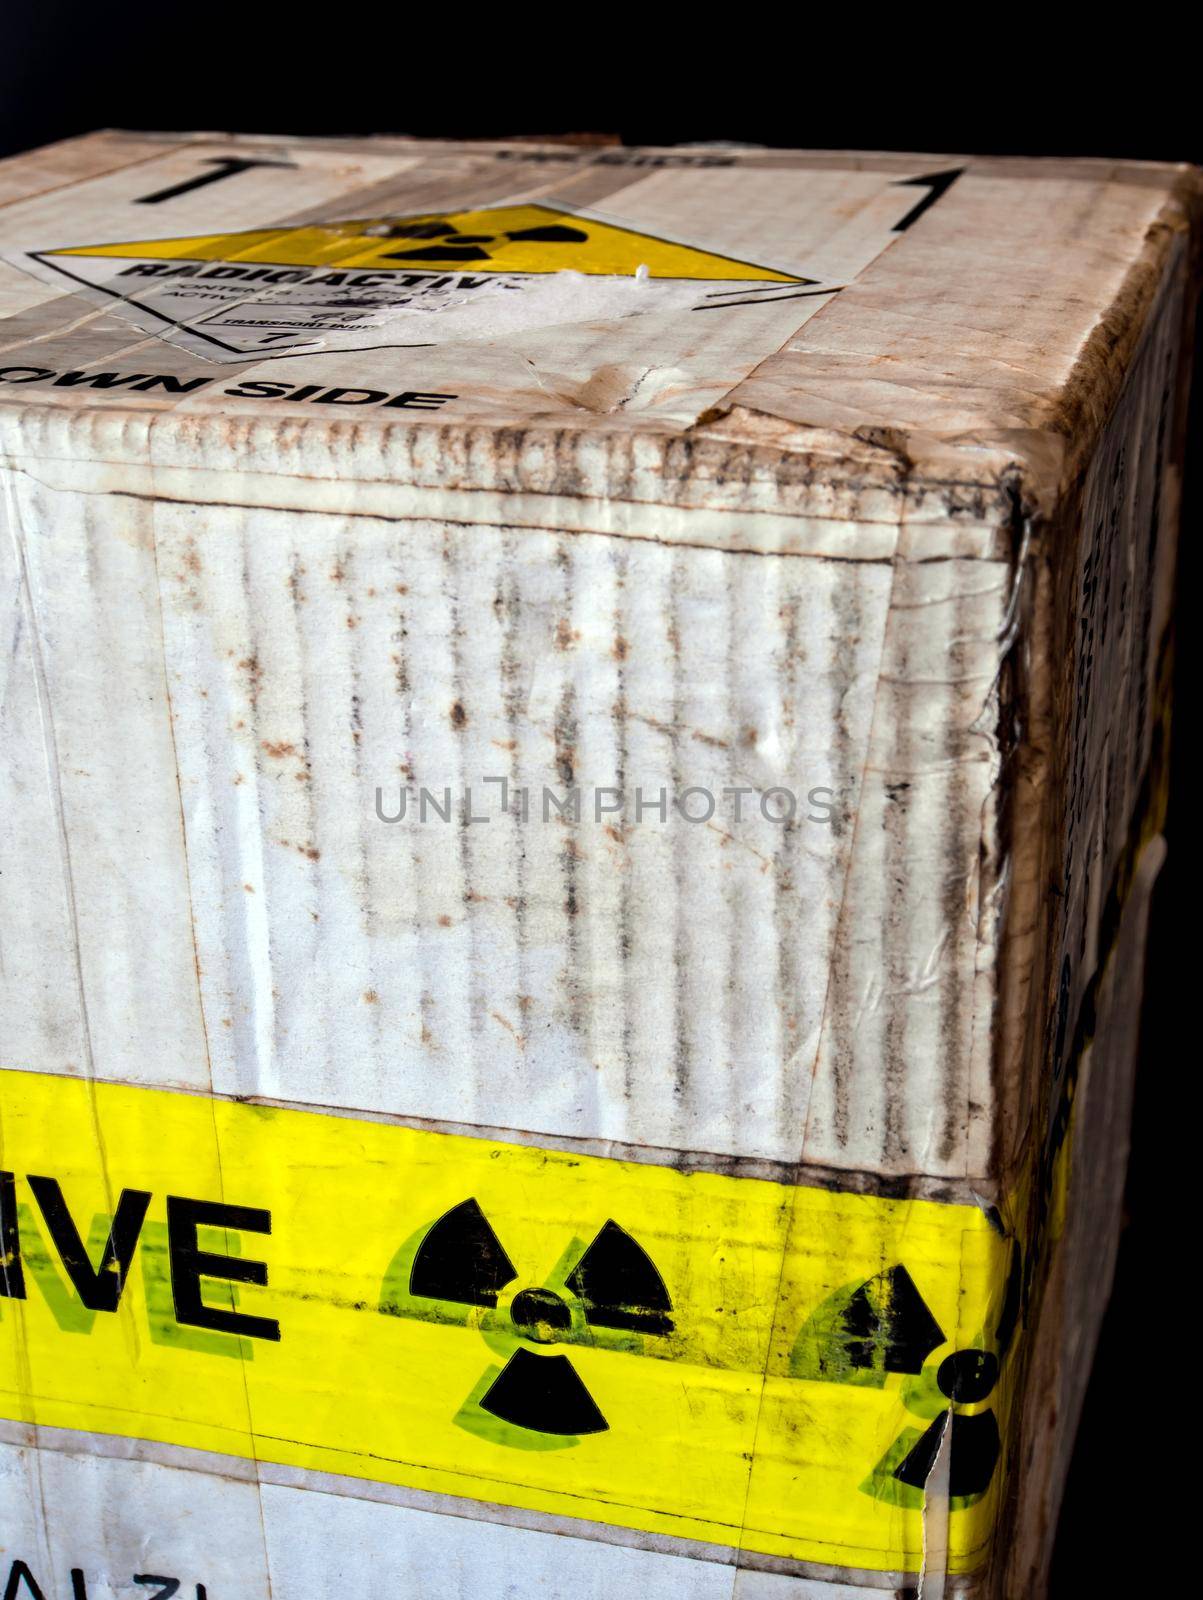 Transportation paper box package type A for small radioactive material